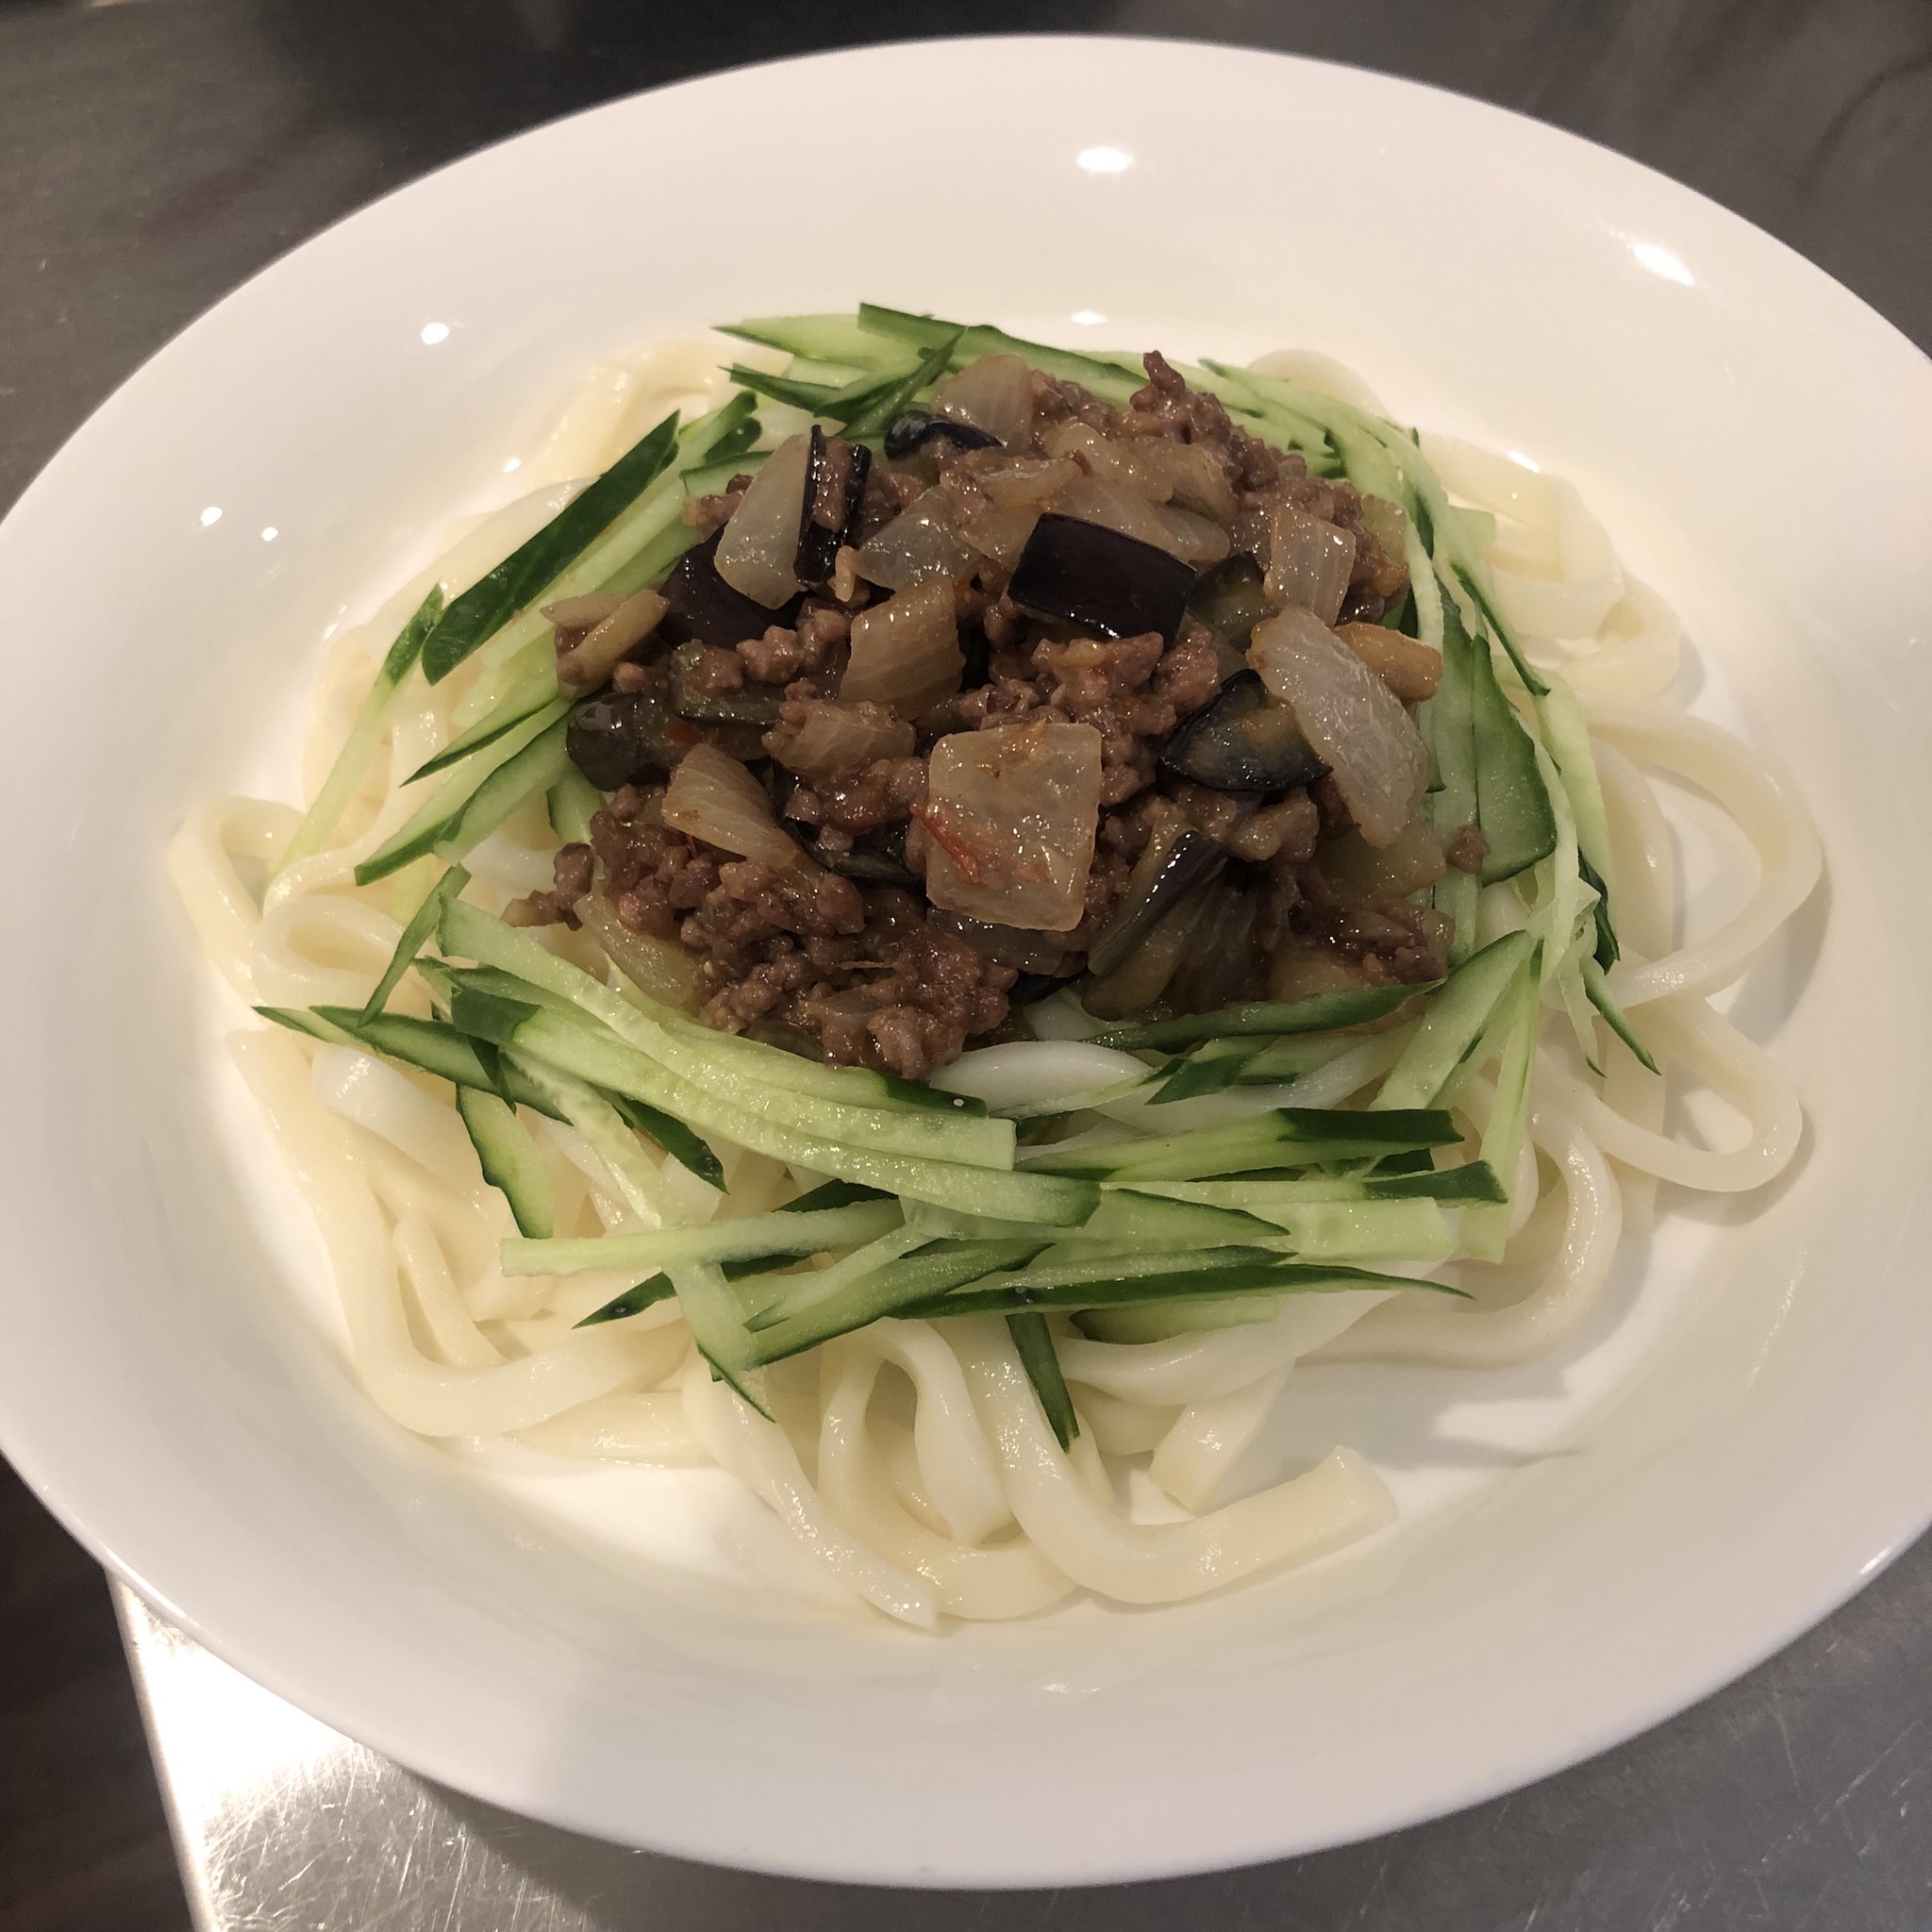 GROUND MEAT UDON NOODLES WITH MISO